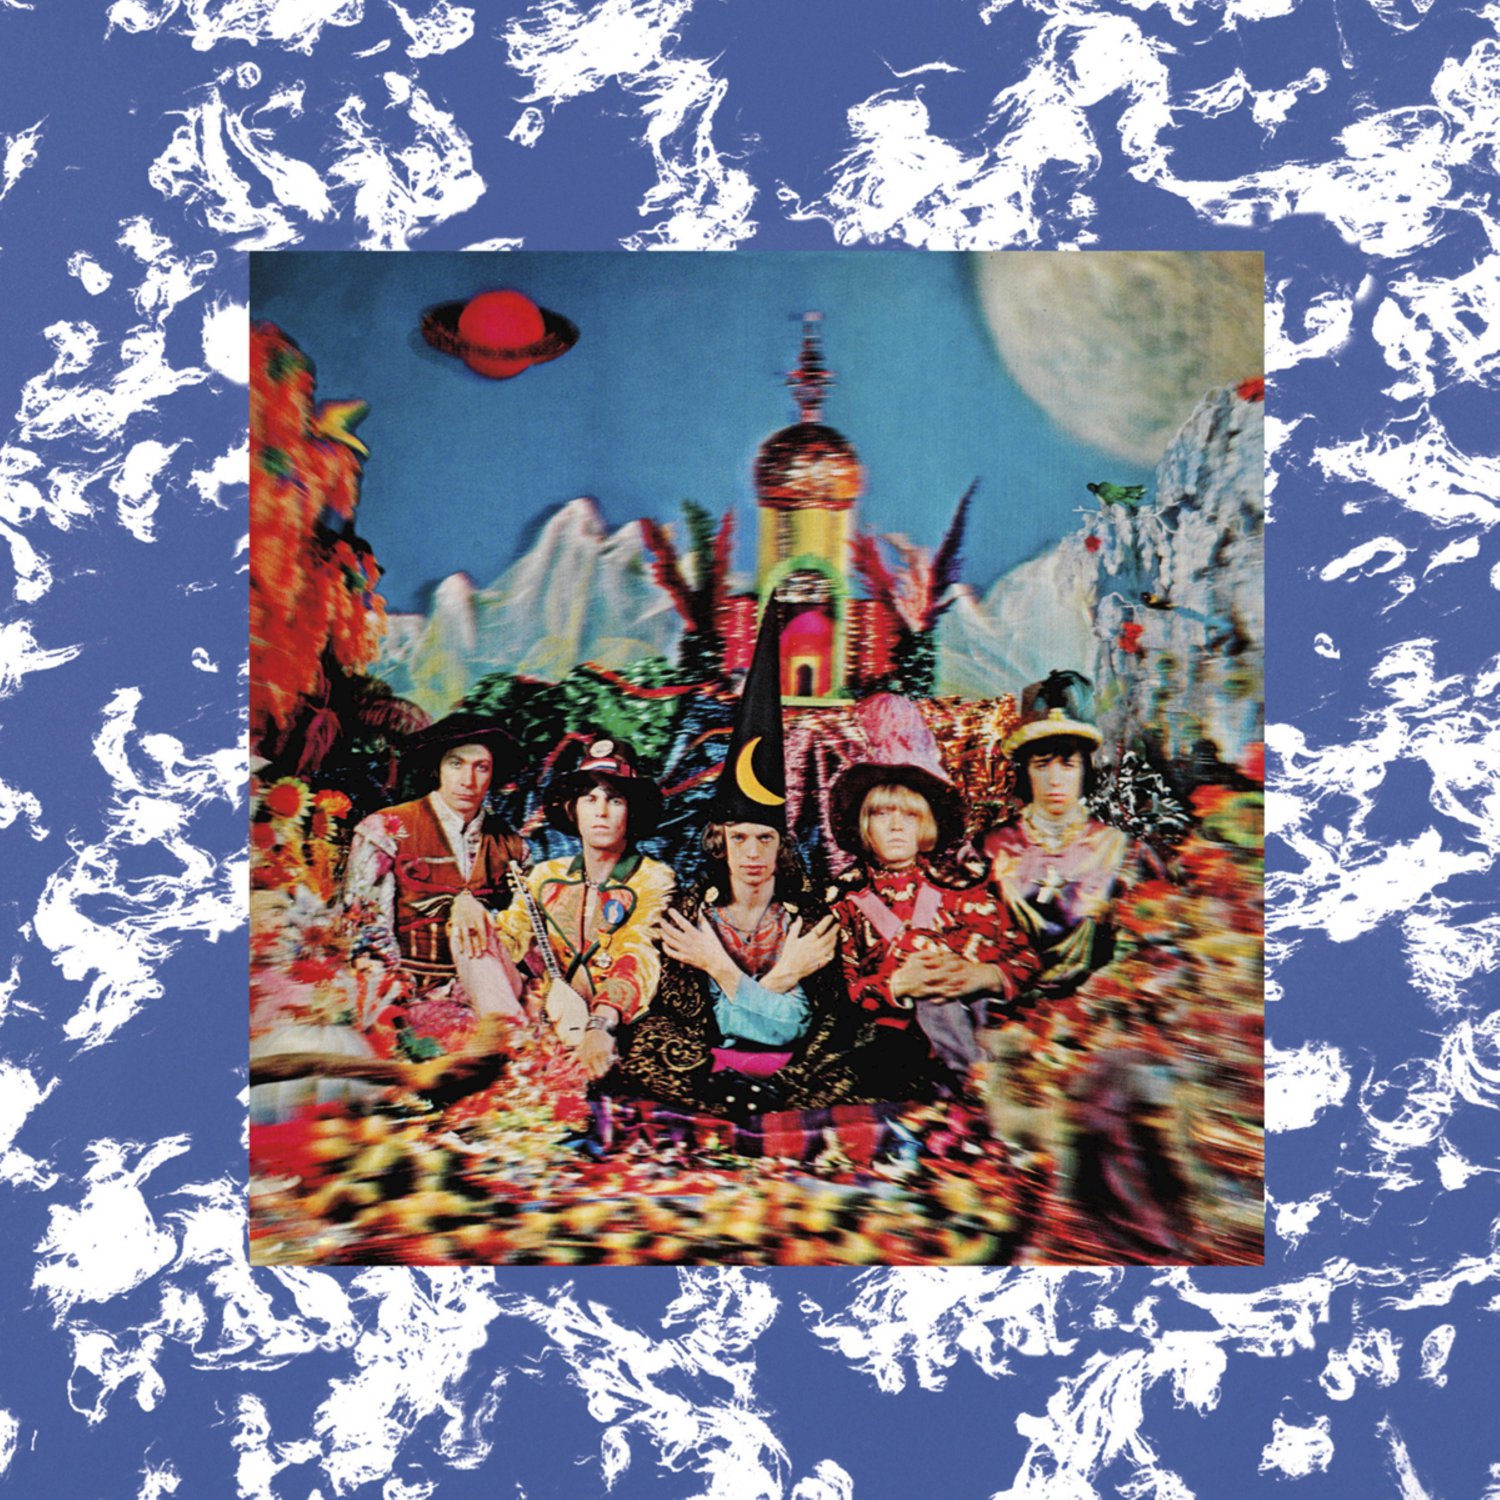 ROLLING STONES Their Satanic Majesties Request BANNER Huge 4X4 Ft Fabric Poster Tapestry Flag art